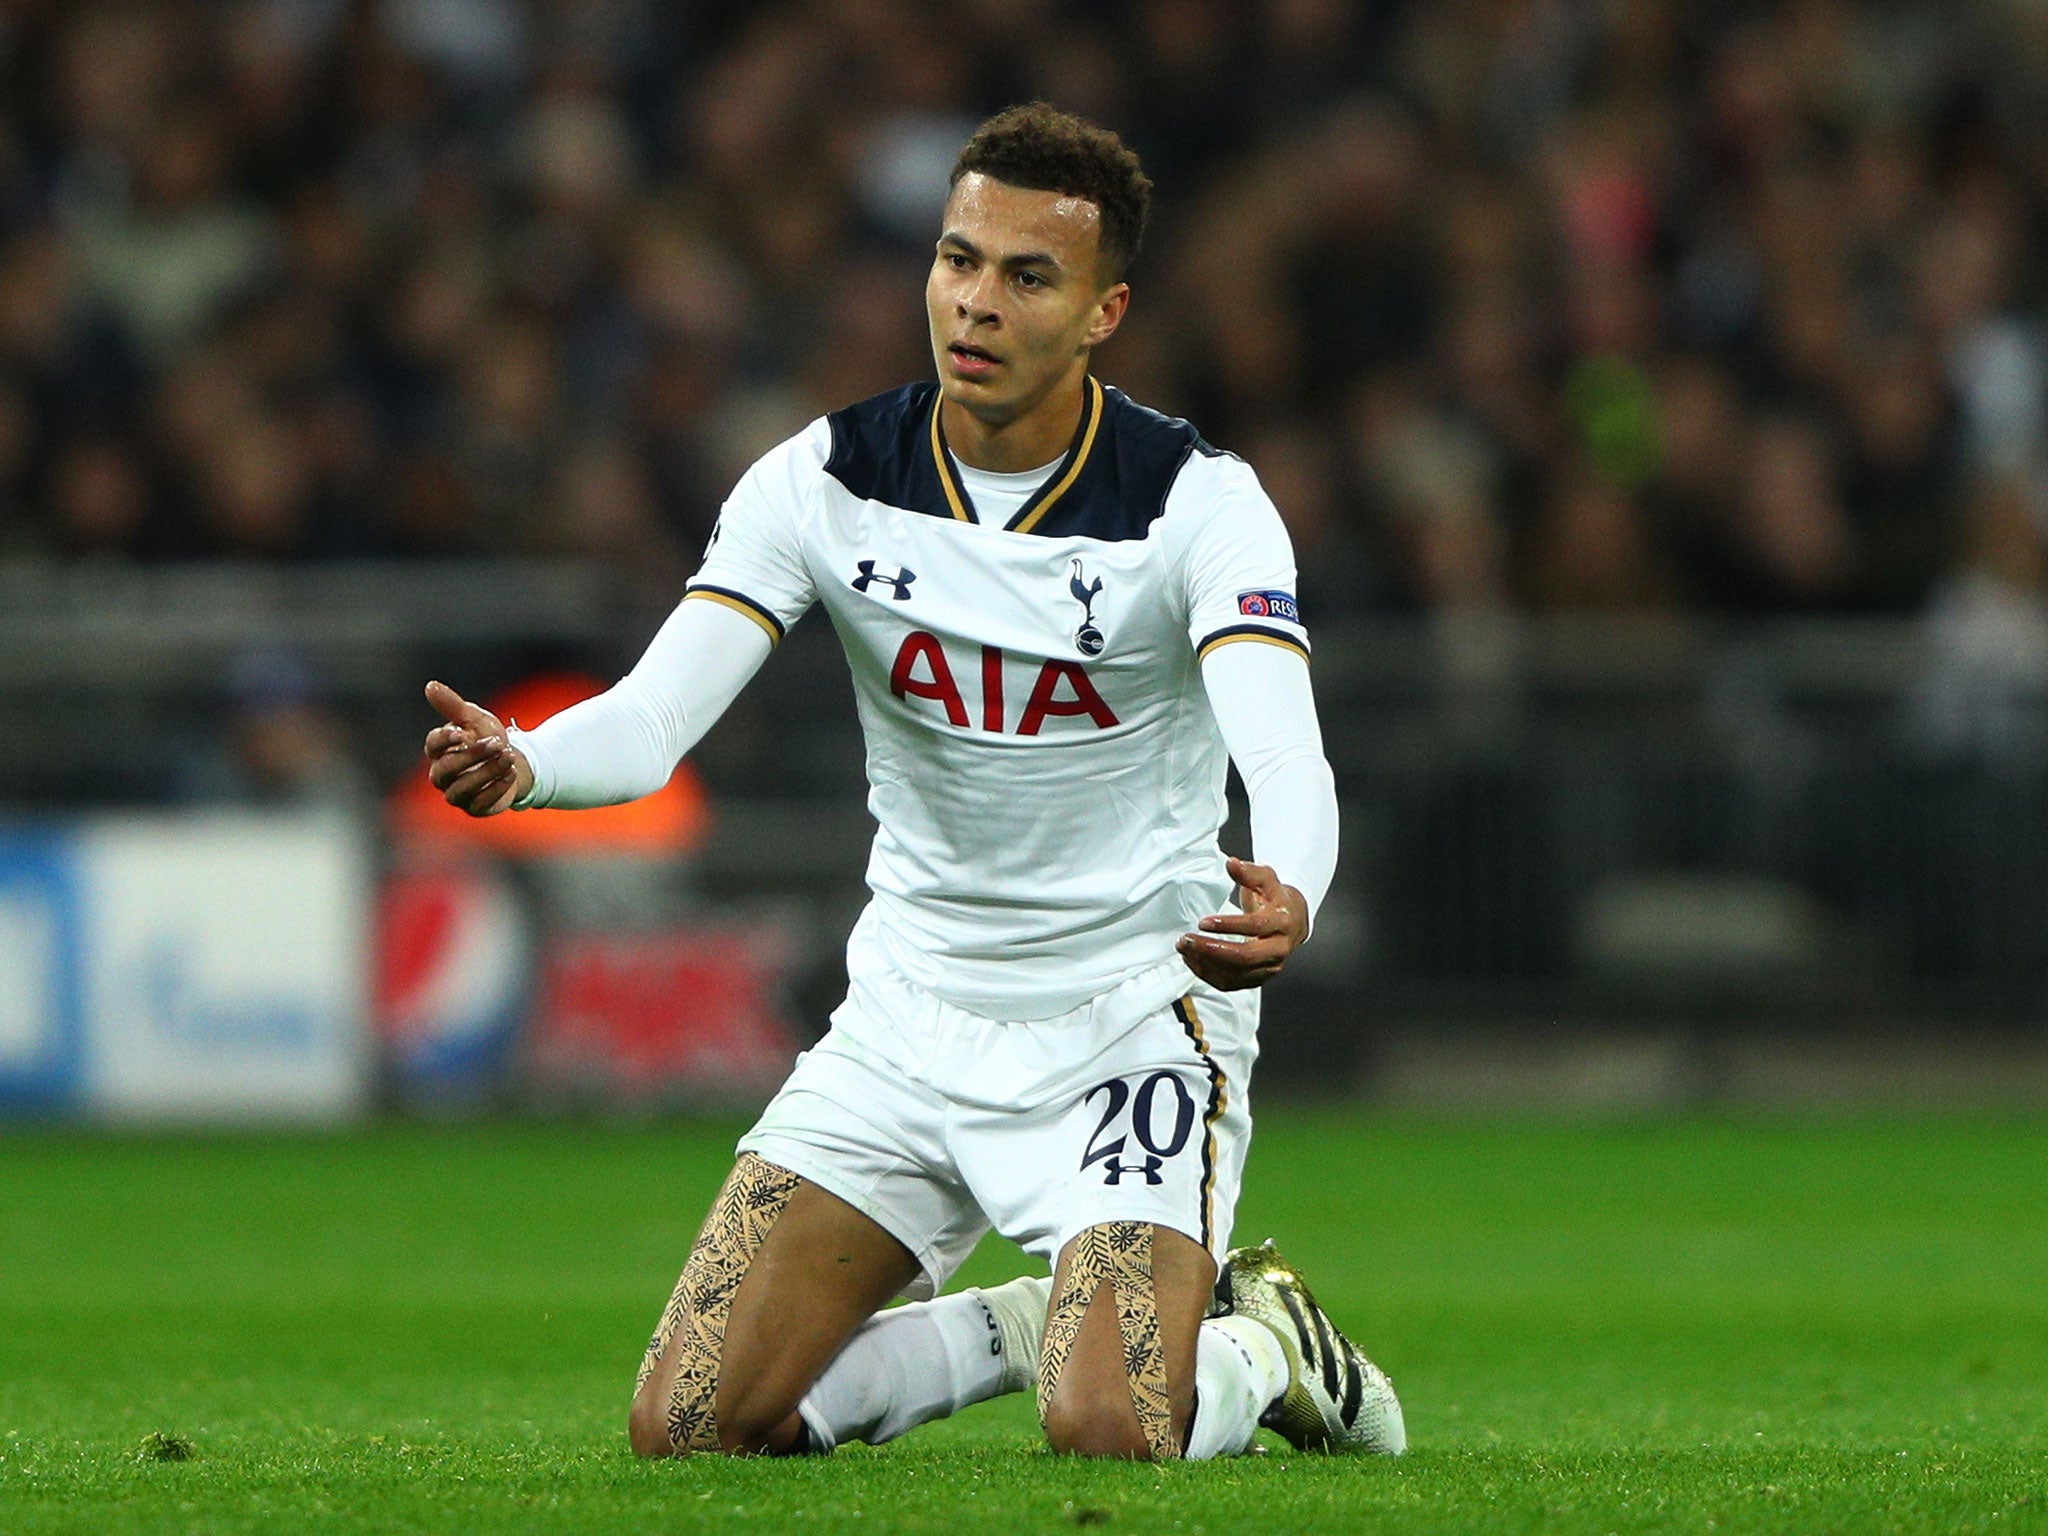 Tottenham have suffered yet another injury setback